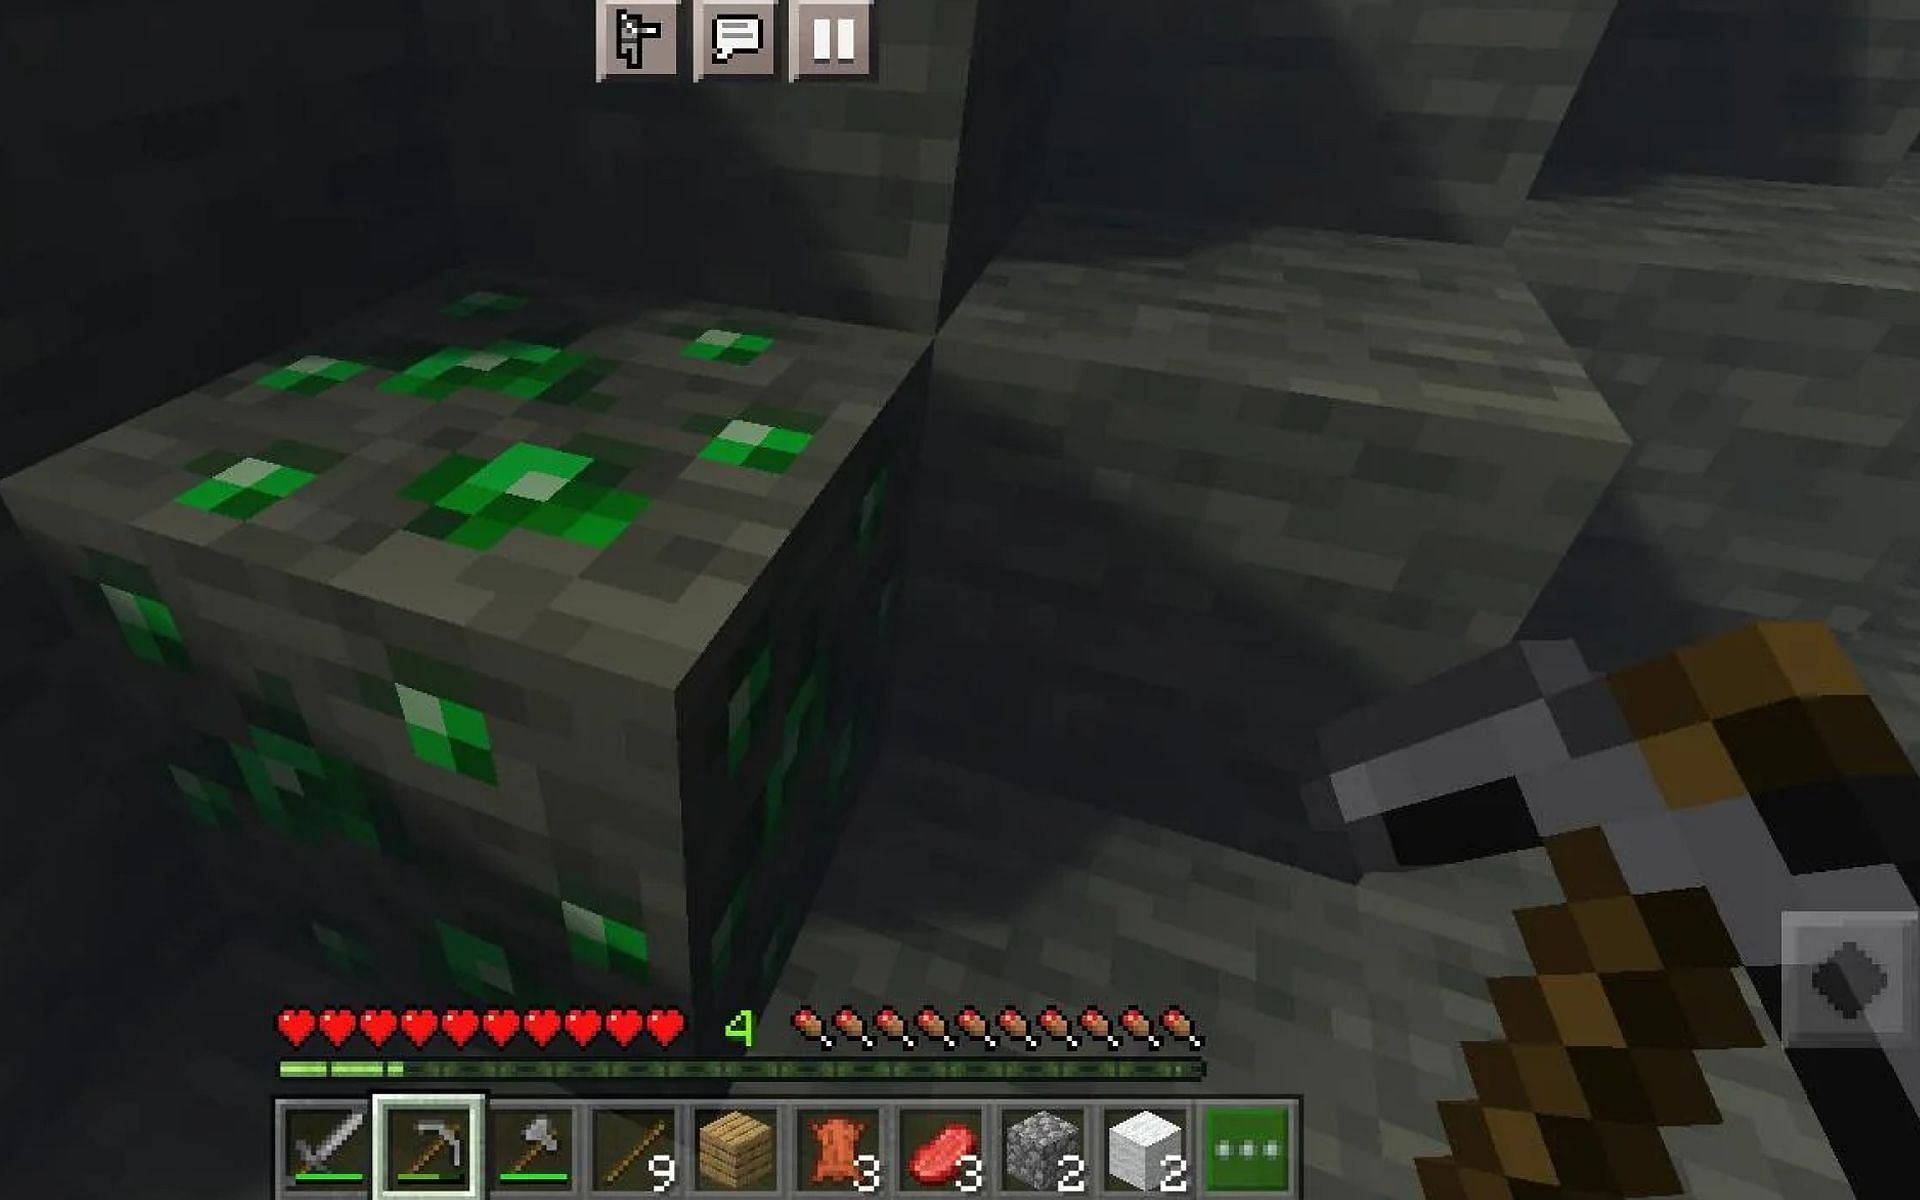 A player mines emeralds in-game. Image via Minecraft.